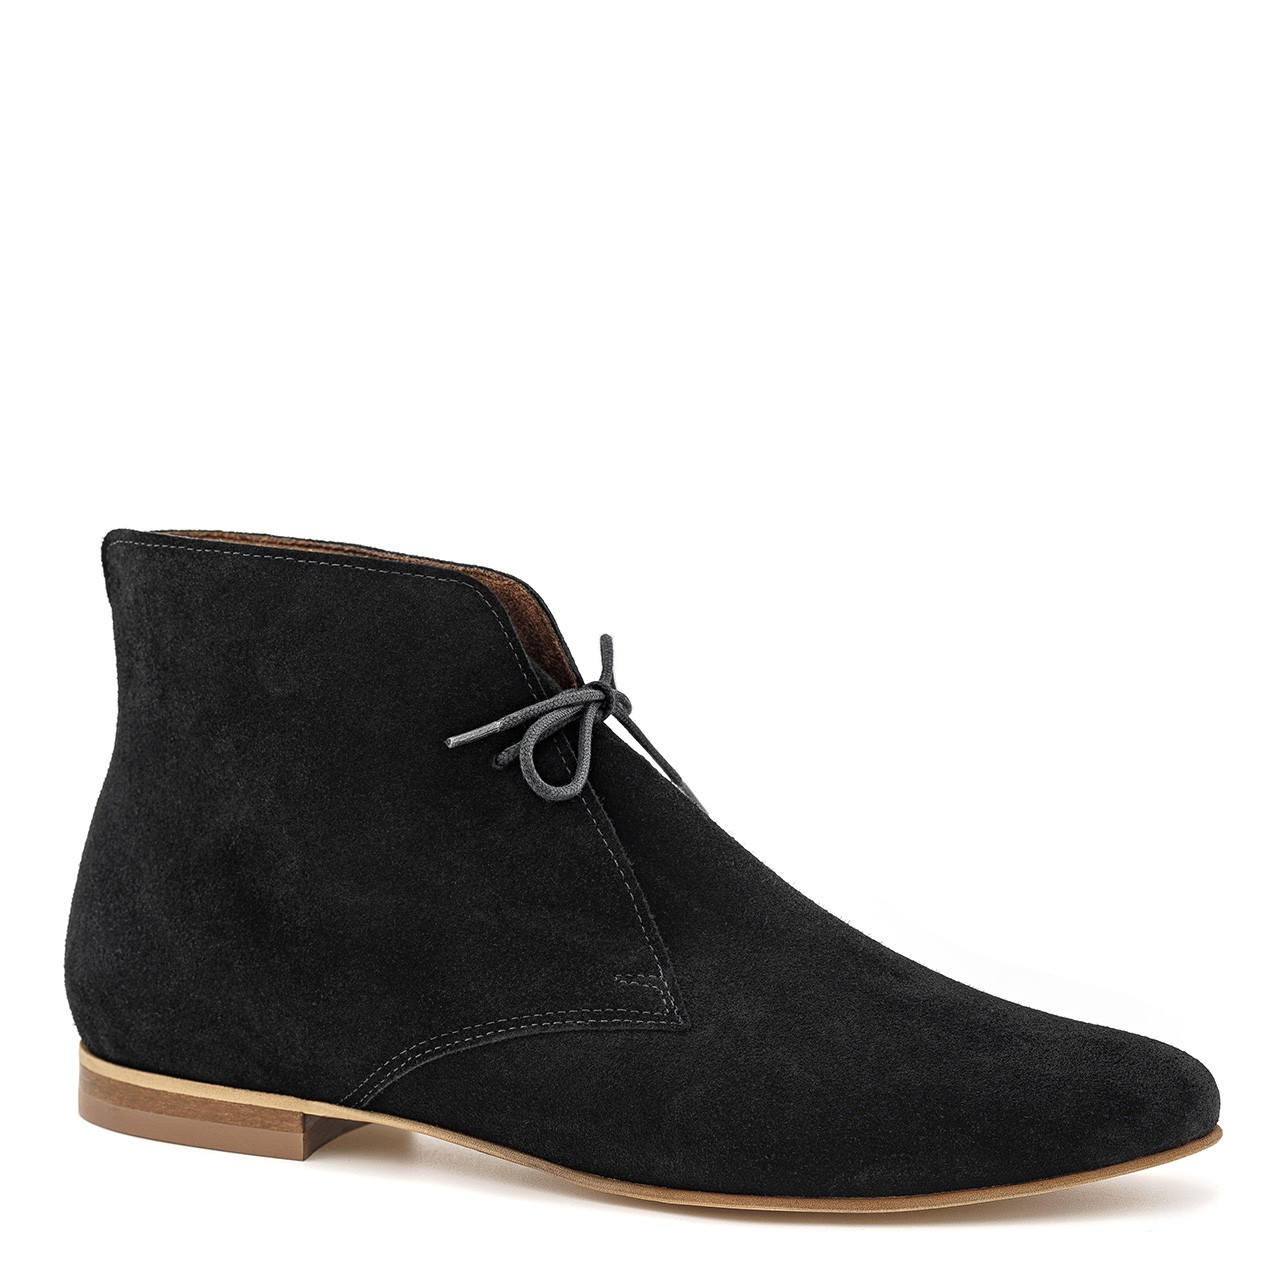 Black lace-up ankle boots with a flat sole, made from natural velour ...